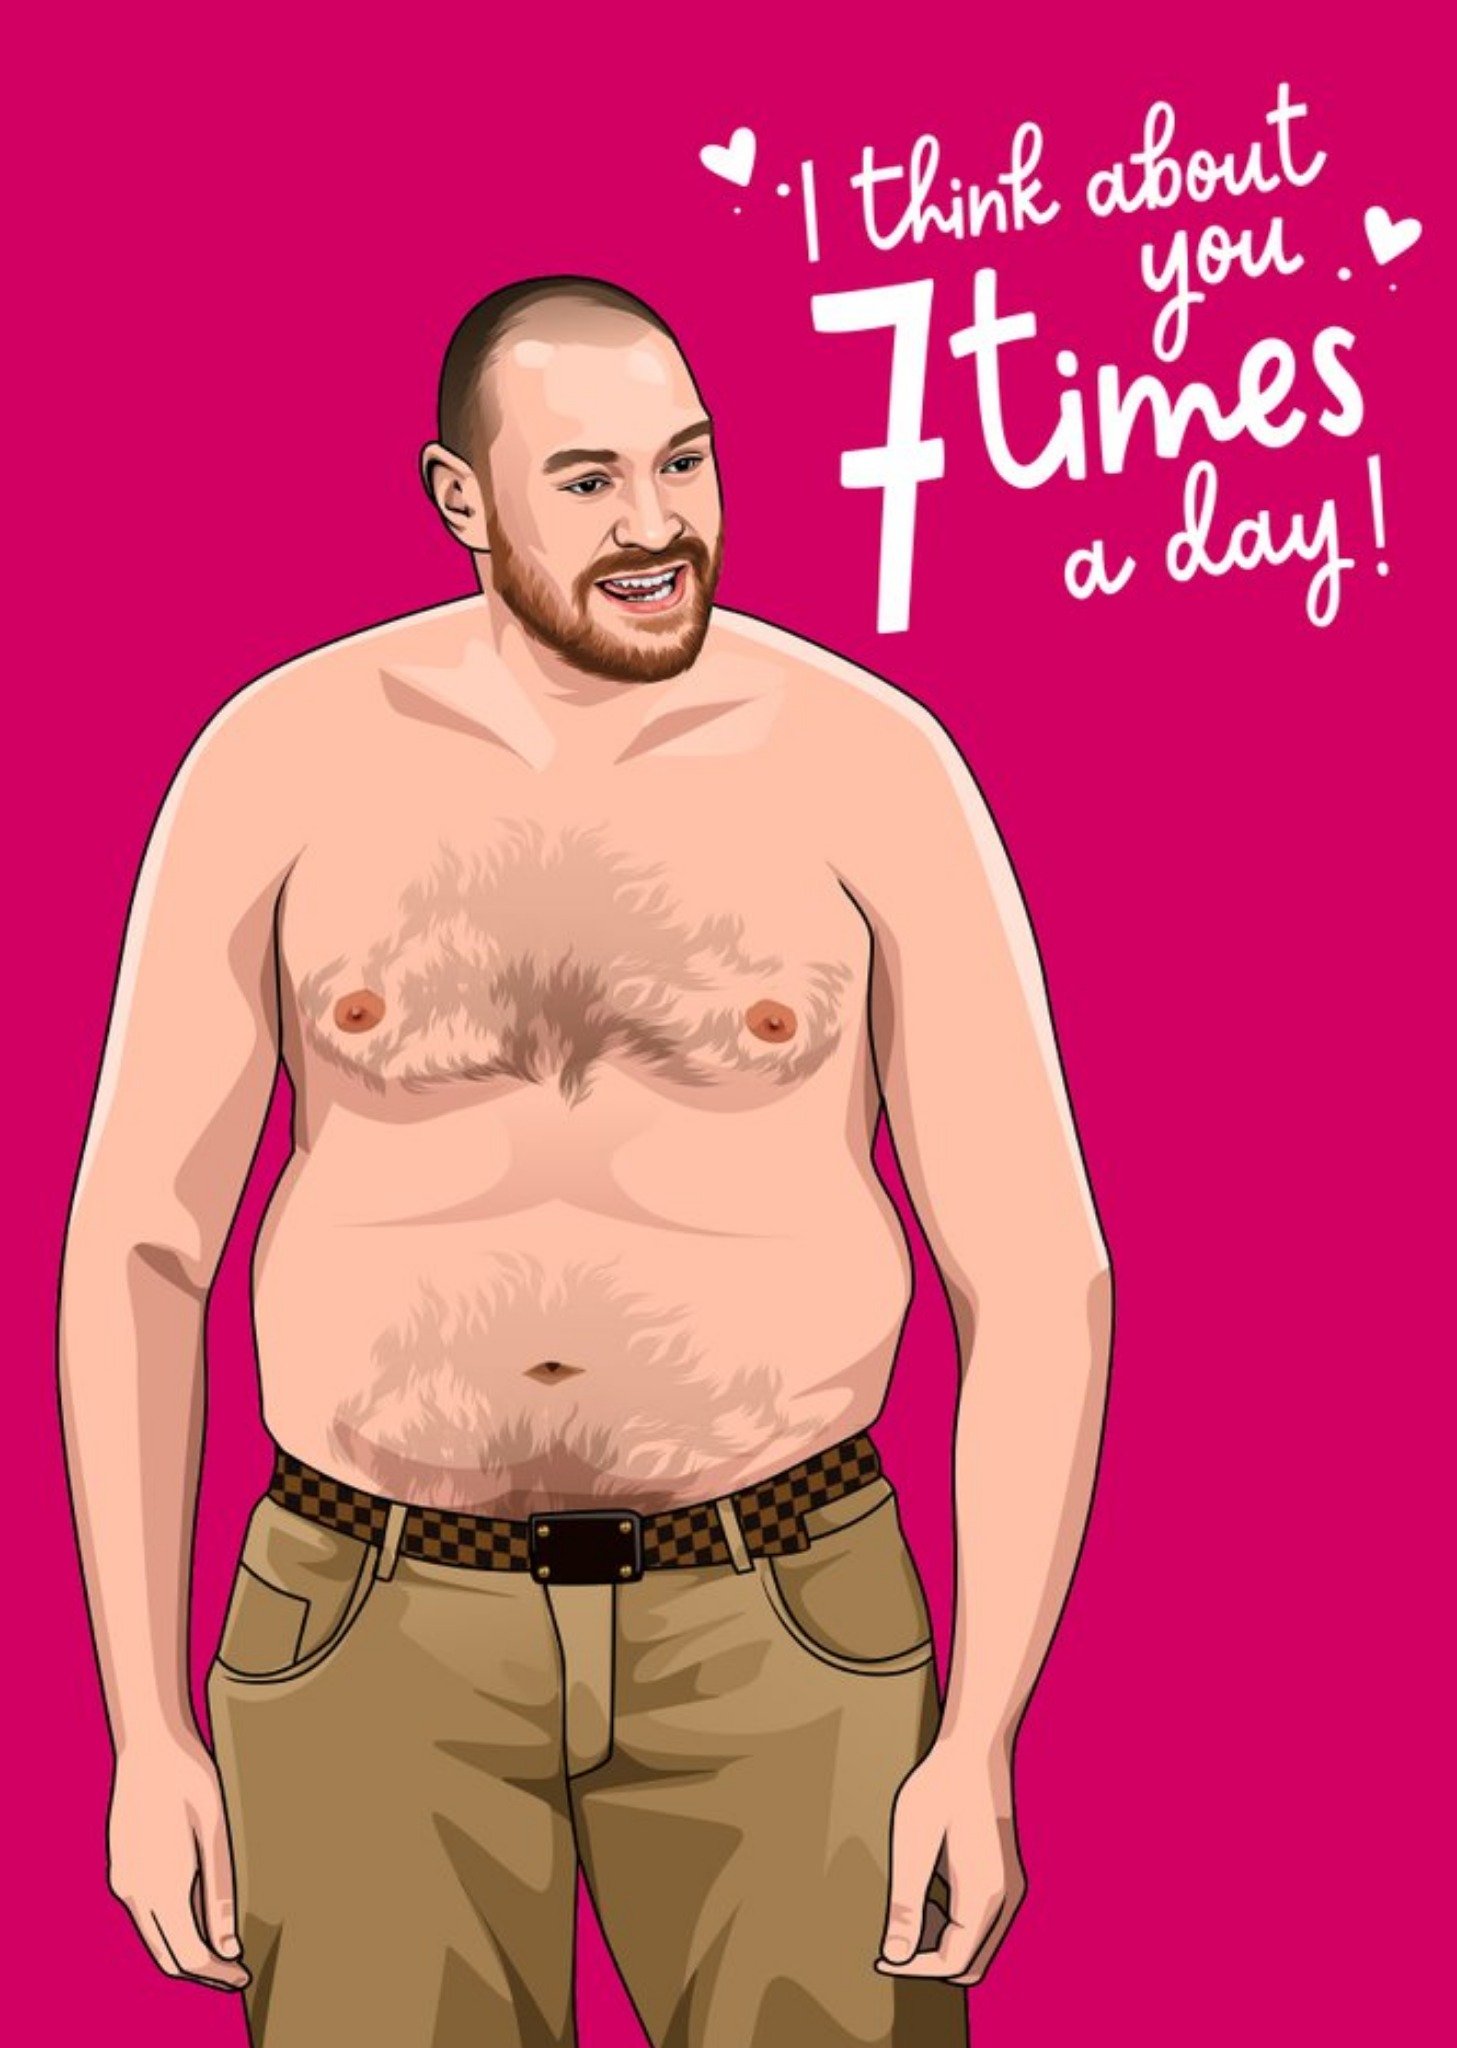 All Things Banter Humour Illustration Of Boxer Gypsy King Valentine's Card Ecard